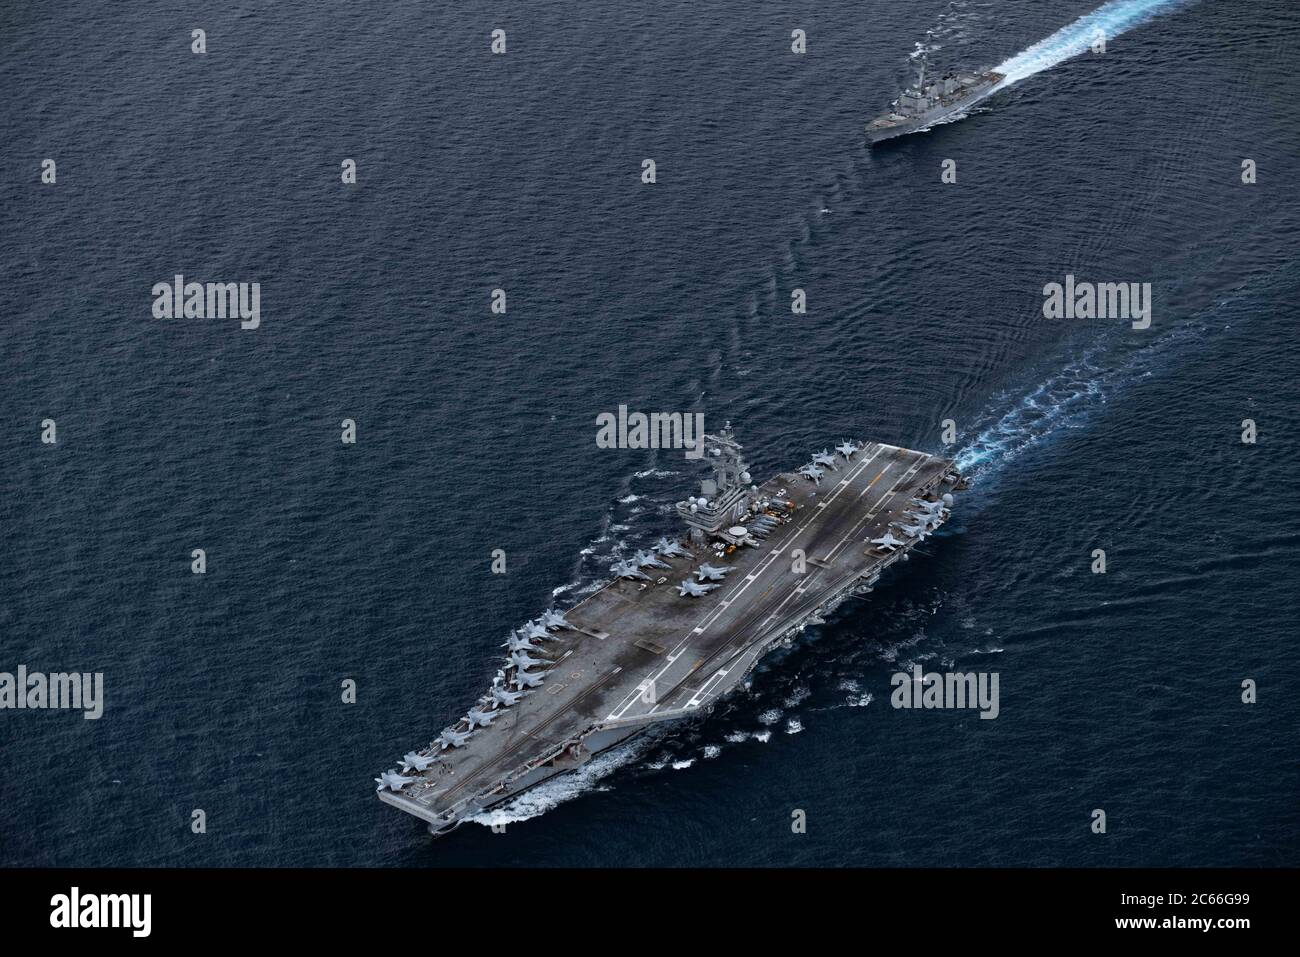 The U.S. Navy Nimitz-class aircraft carrier USS Ronald Reagan and Arleigh Burke-class guided missile destroyer USS Mustin steam in formation during dual-carrier operations July 6, 2020 in the South China Sea. Stock Photo